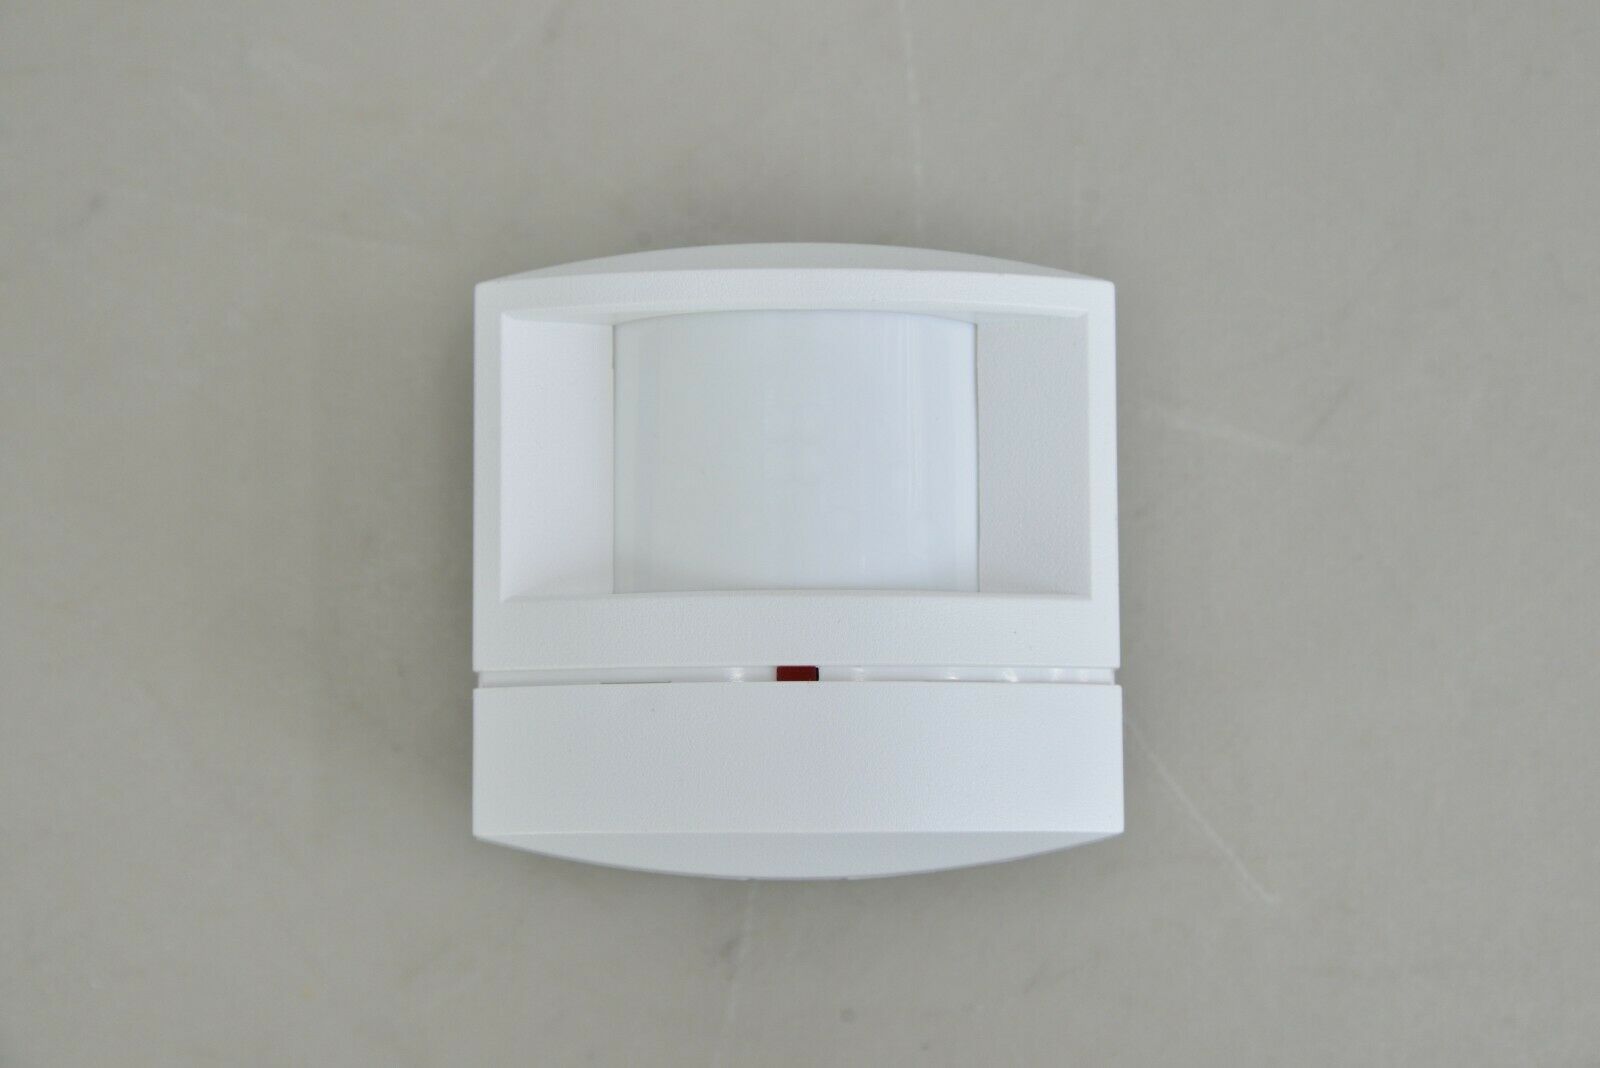 What Does An Infrared Motion Detector Do?